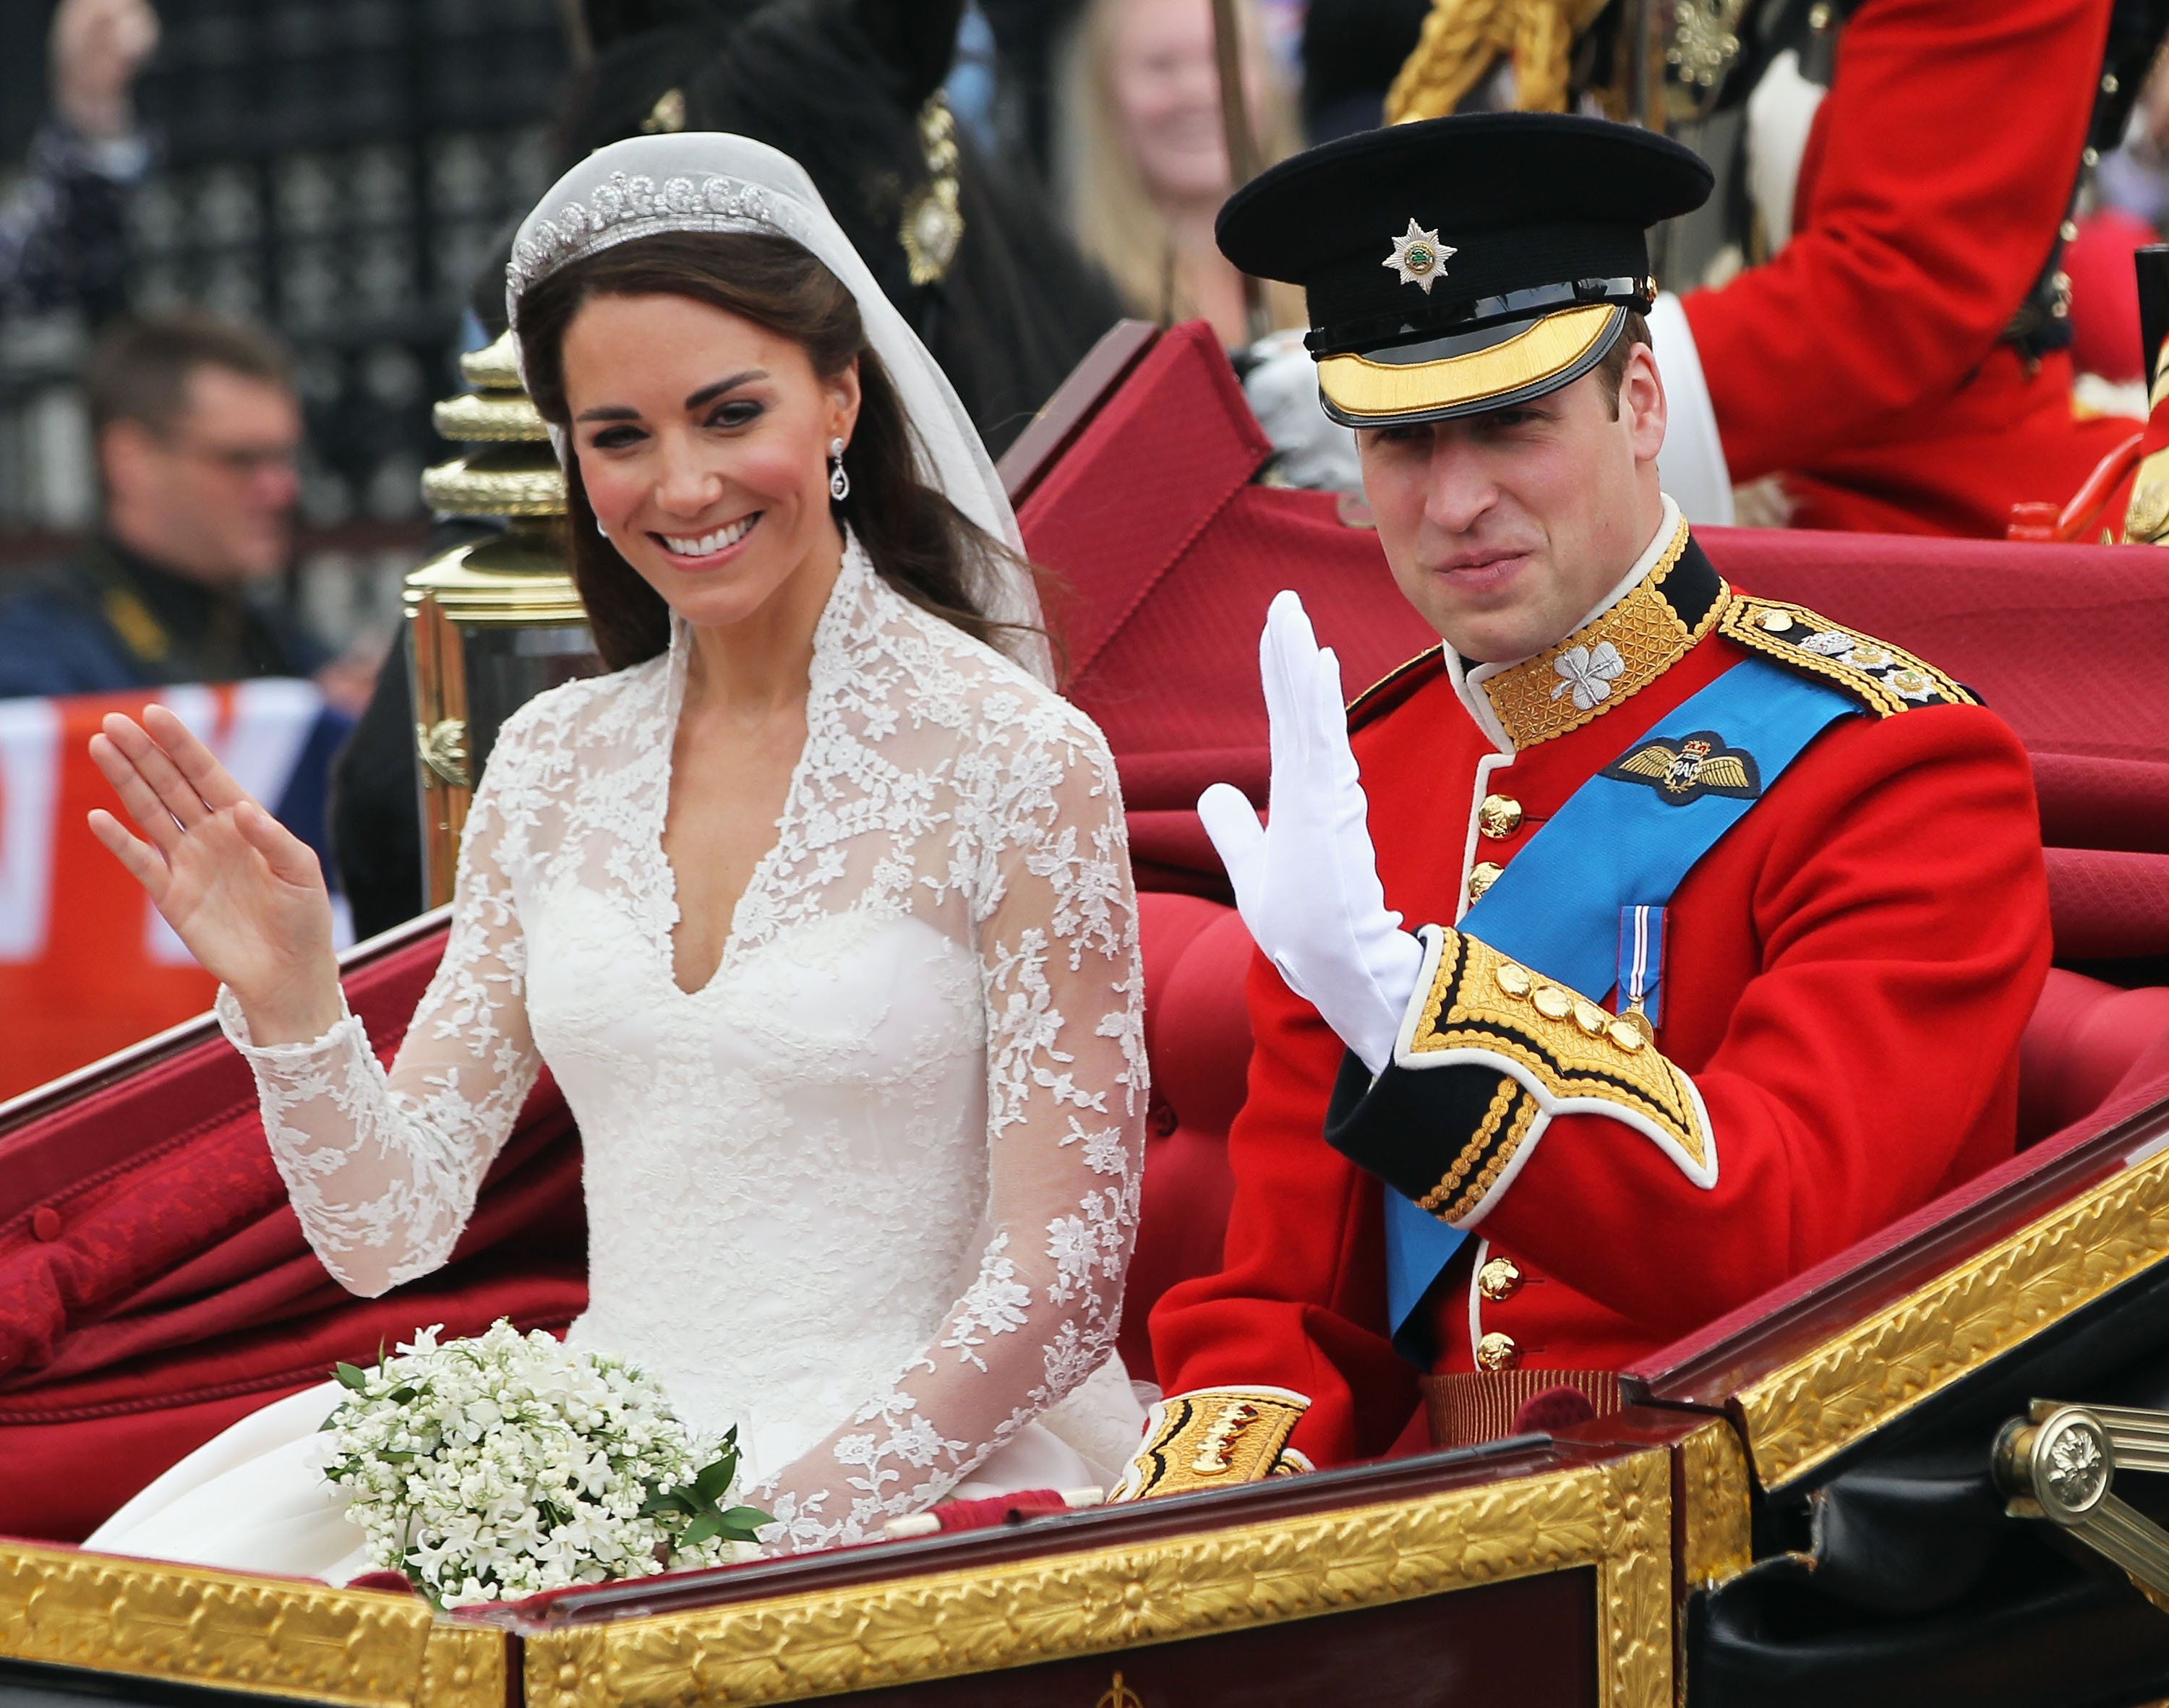 Kate Middleton and Prince William pictured after their wedding ceremony at Westminster Abbey, 2011, London, England. | Photo: Getty Images